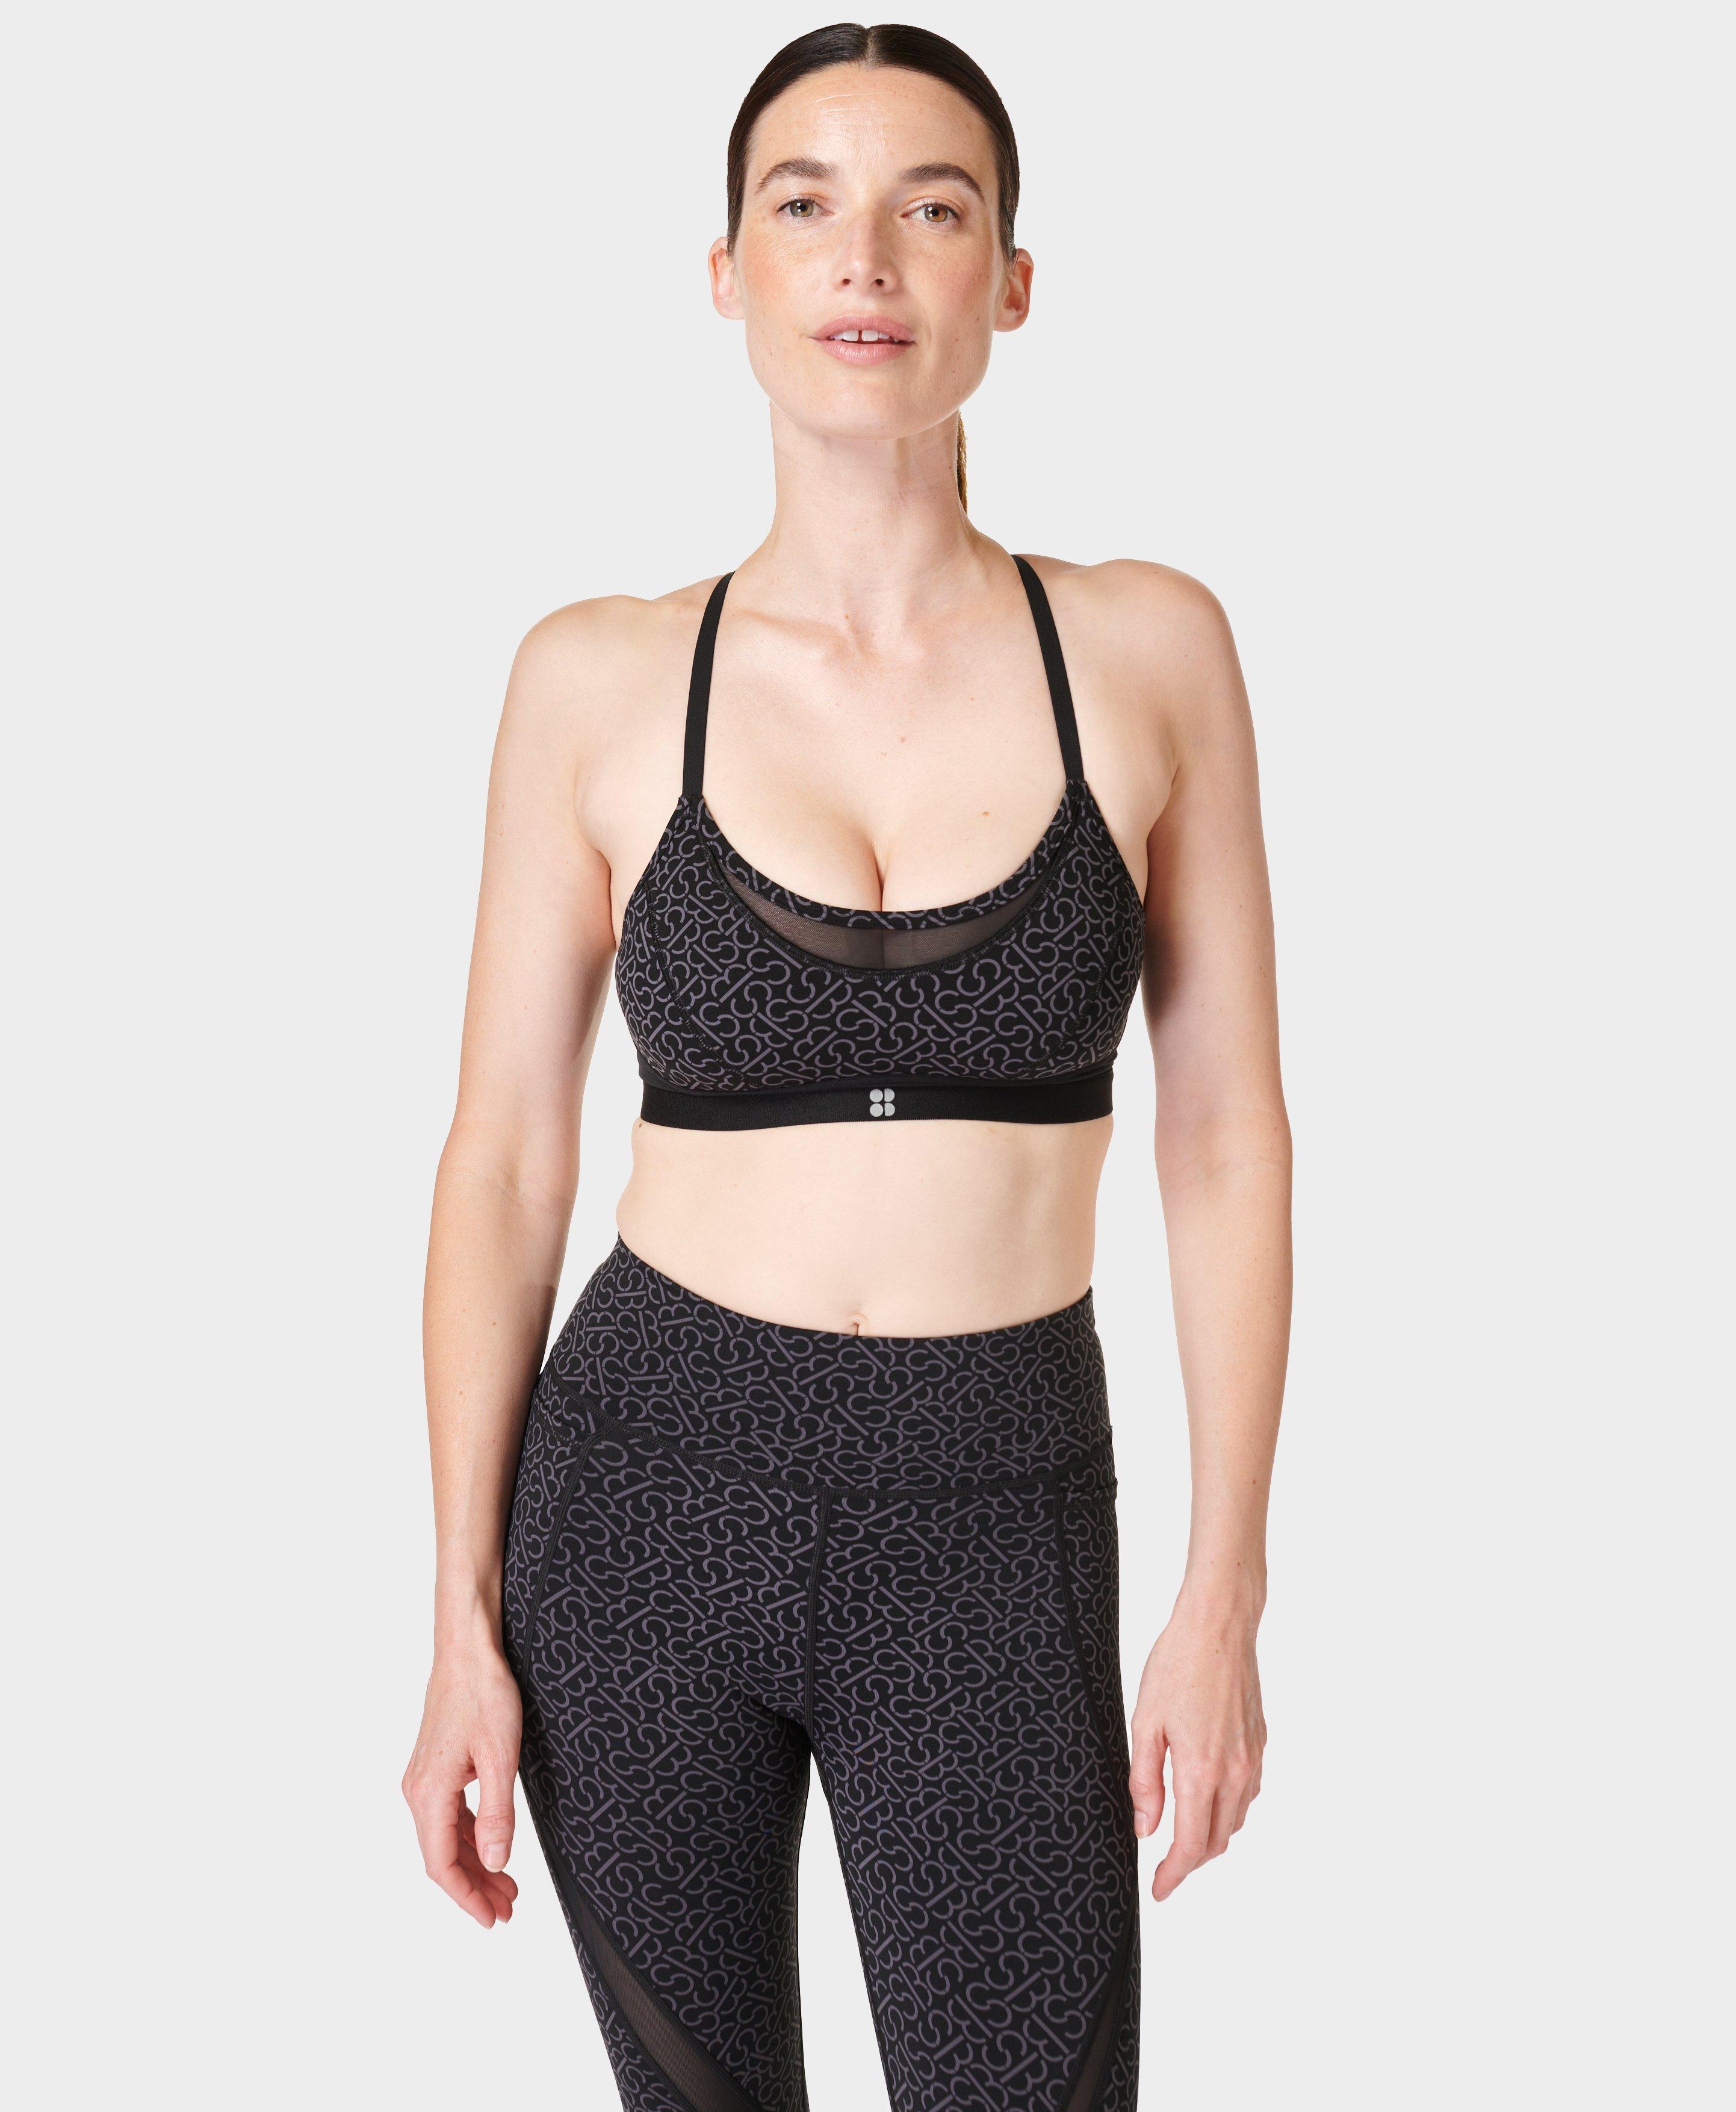 Sweaty Betty Sale - Save Up to 50% Off